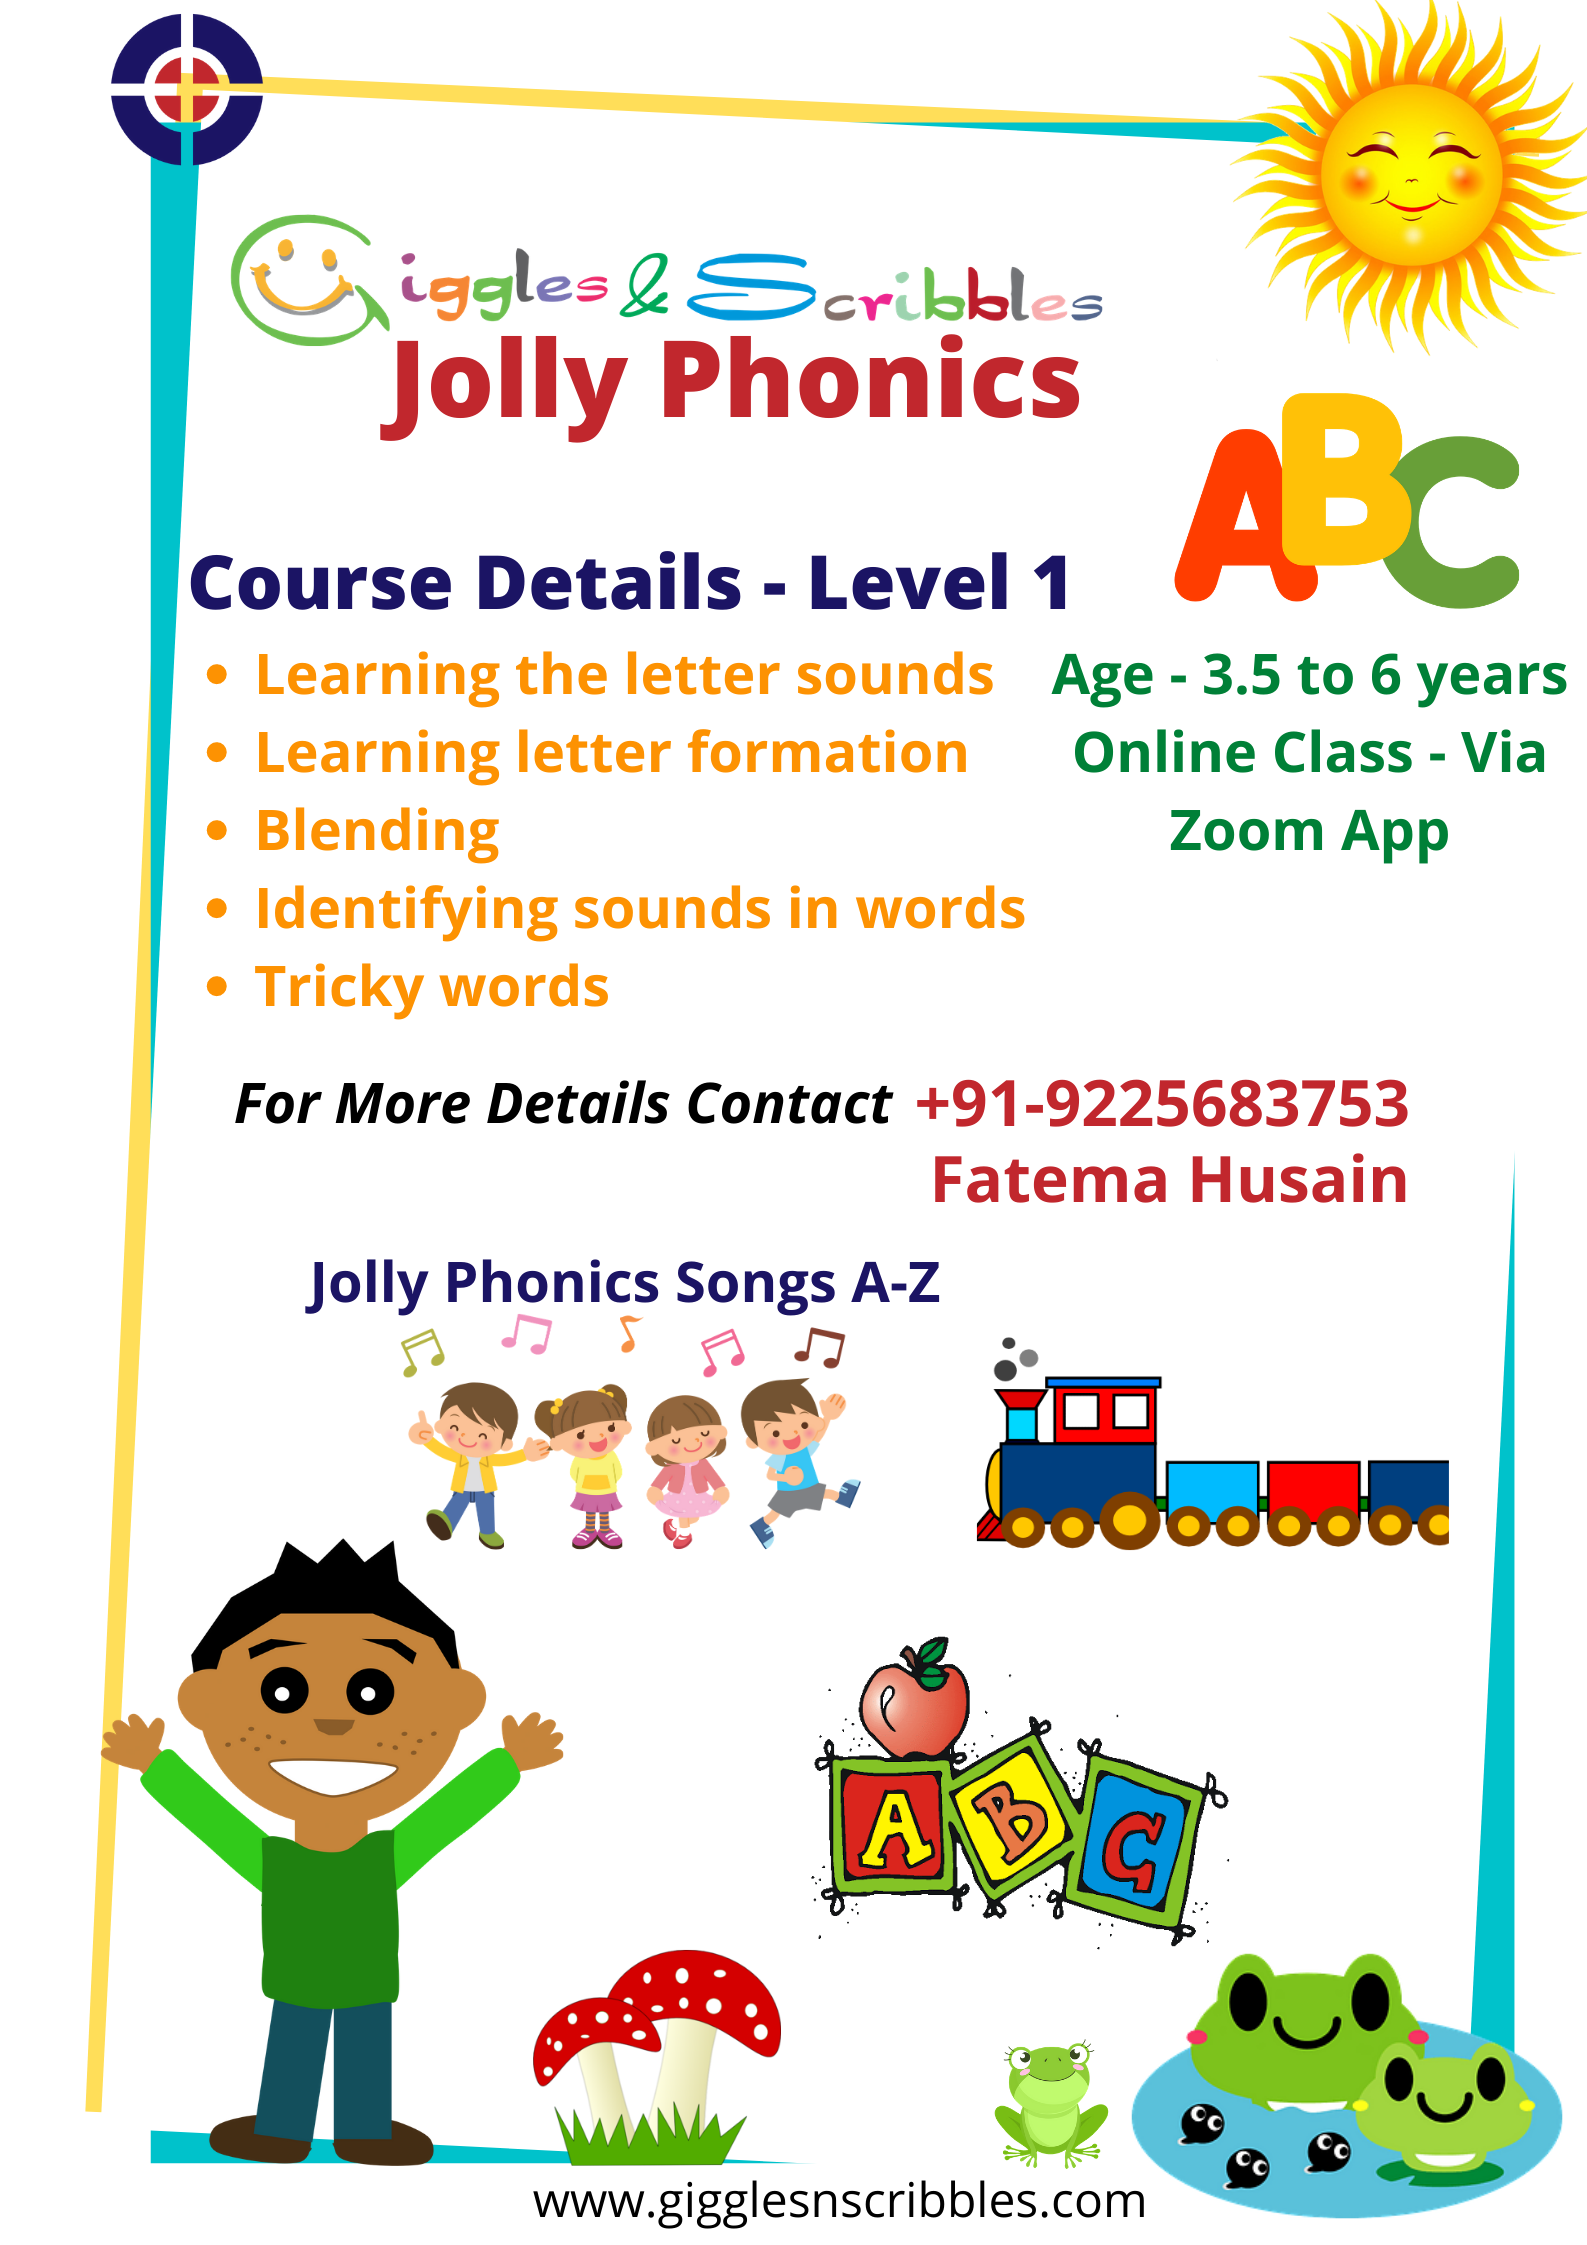 gns-jolly-phonics-course-level-1-giggles-n-scribbles